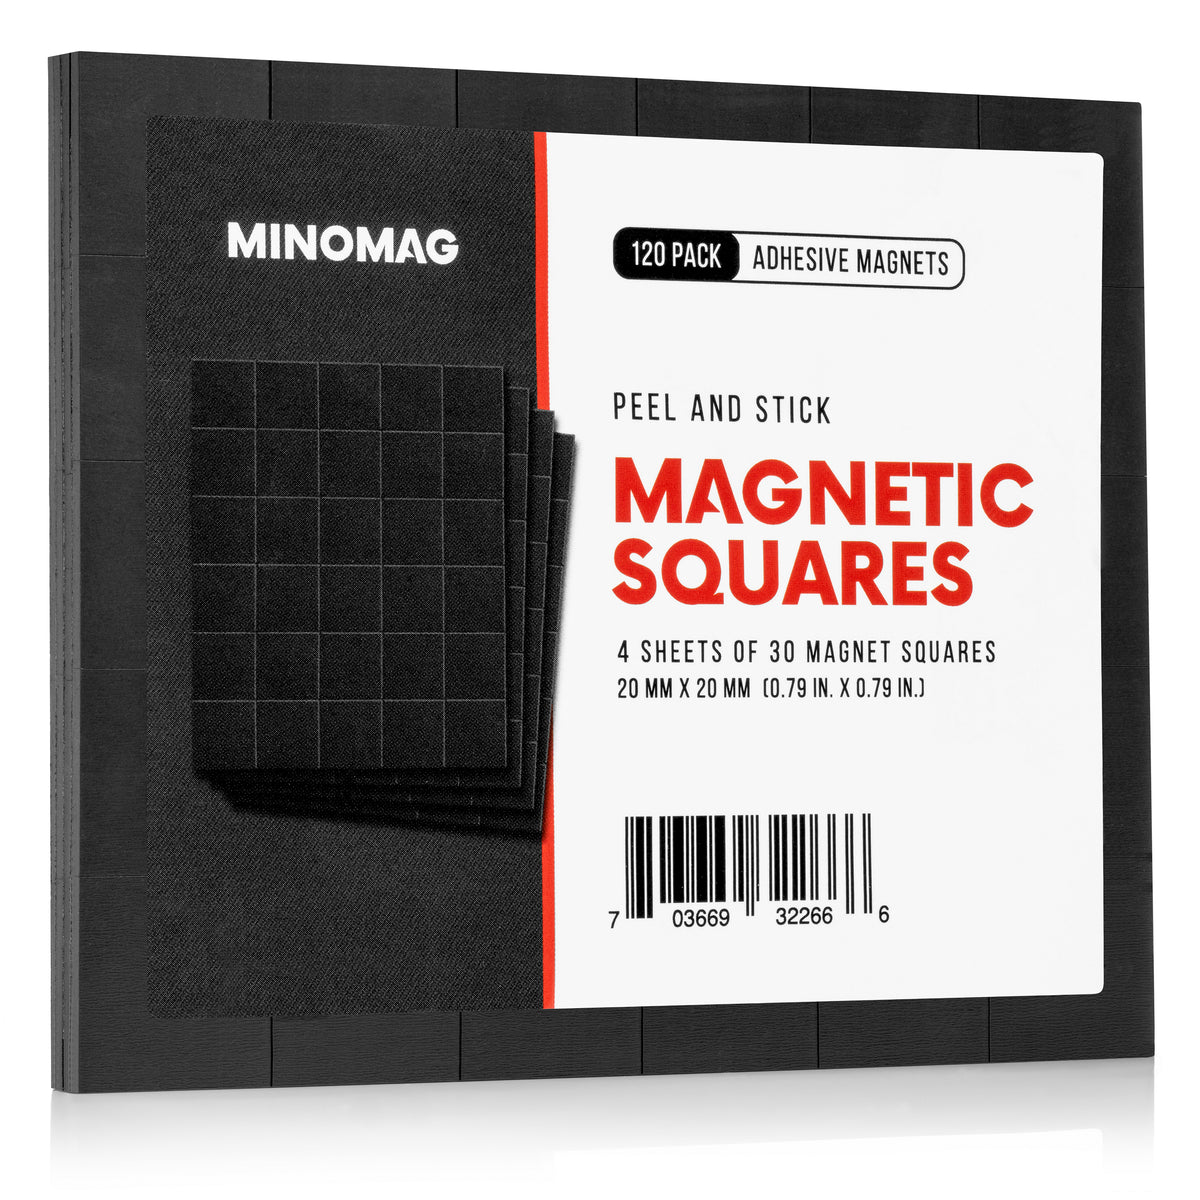 Magnefic Magnetic Squares, 1 Tape Sheet of 70 Magnetic Squares (Each  20x20x2mm), Magnet on one Side, Self Adhesive on The Other Side. Perfect  for